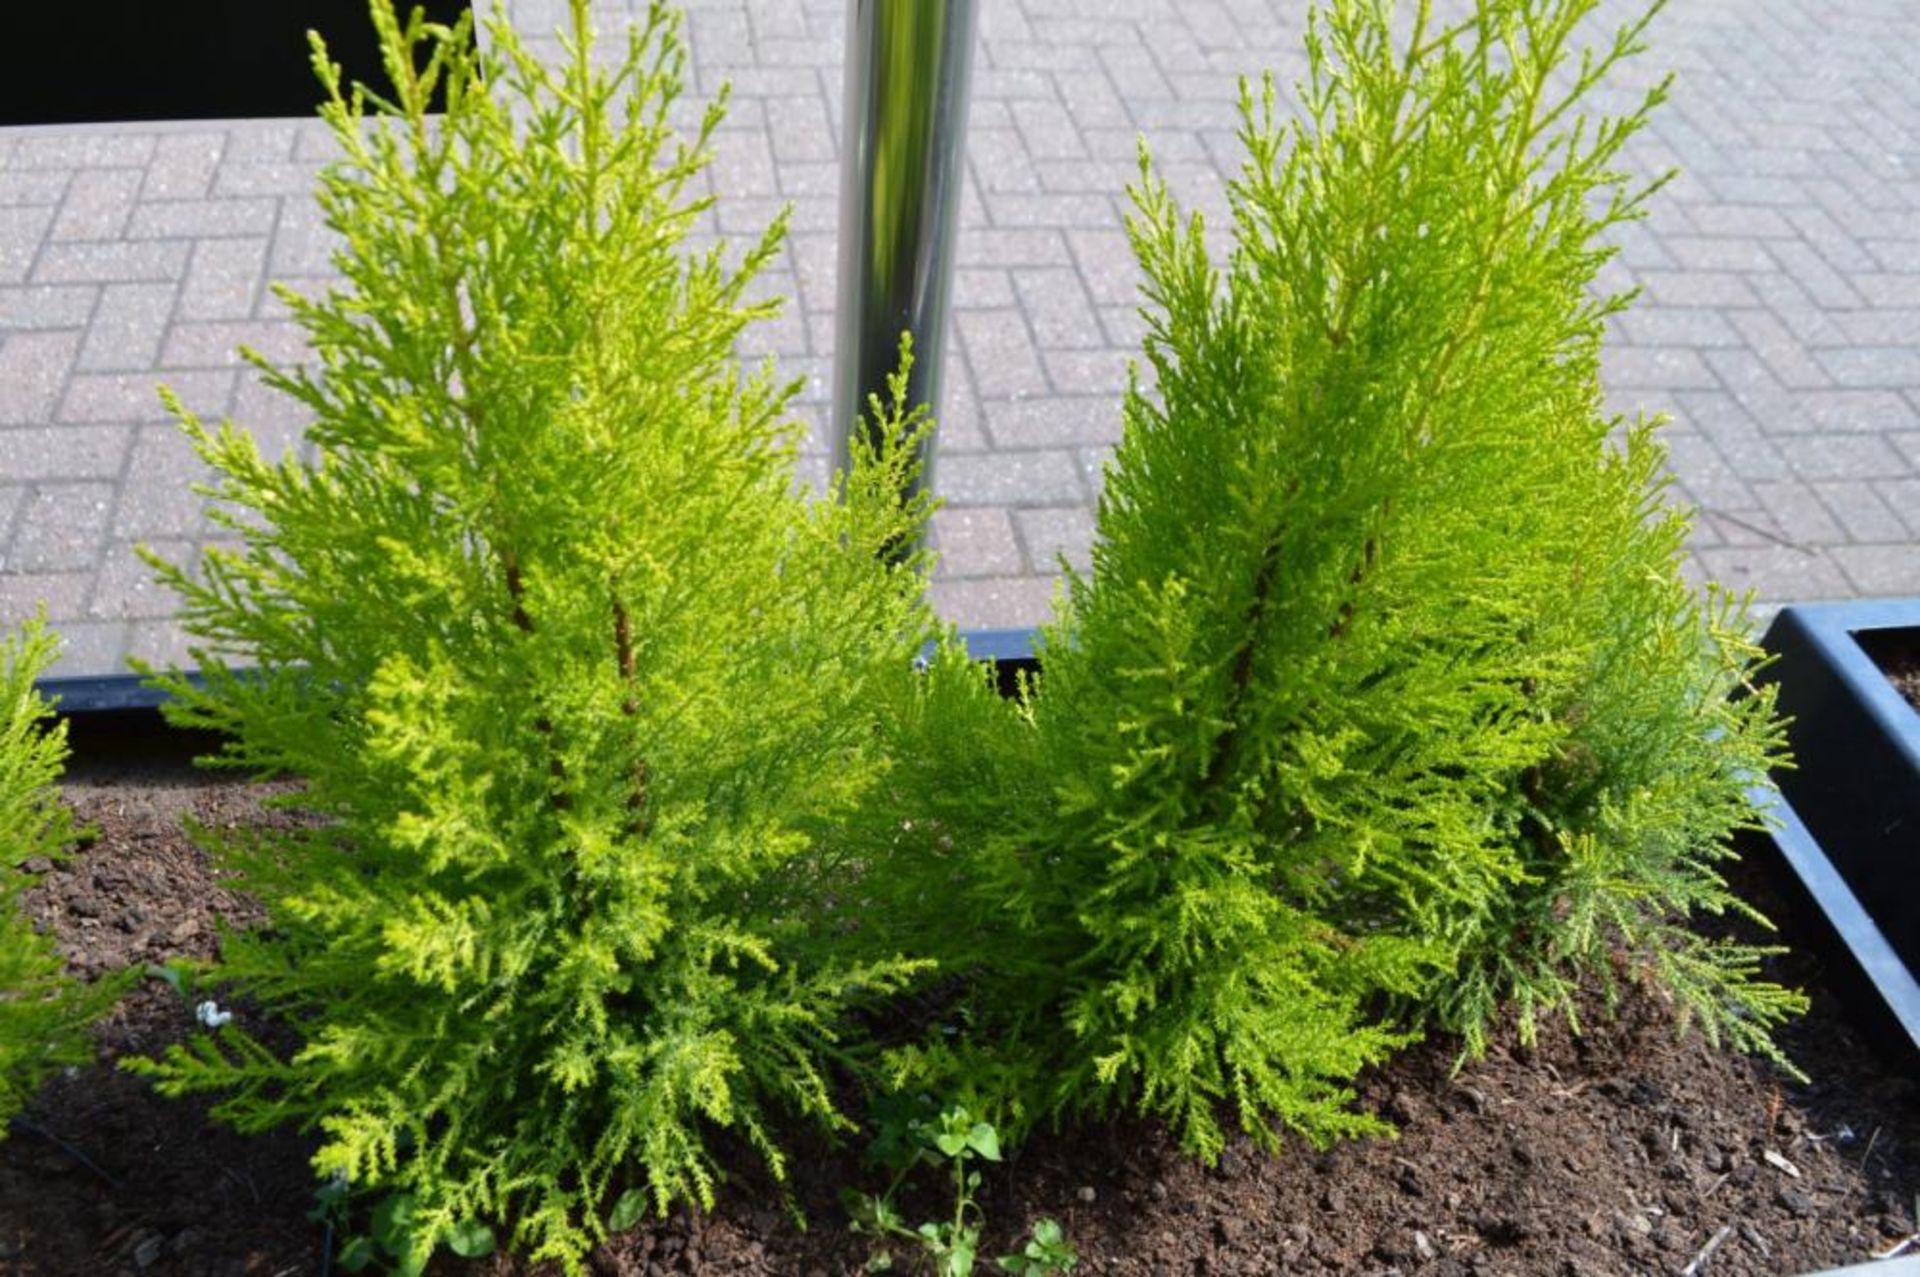 2 x Rectangular Outdoor Planters in Black With Small Conifer Trees - Pair of - Planter Size H55 x - Image 2 of 4